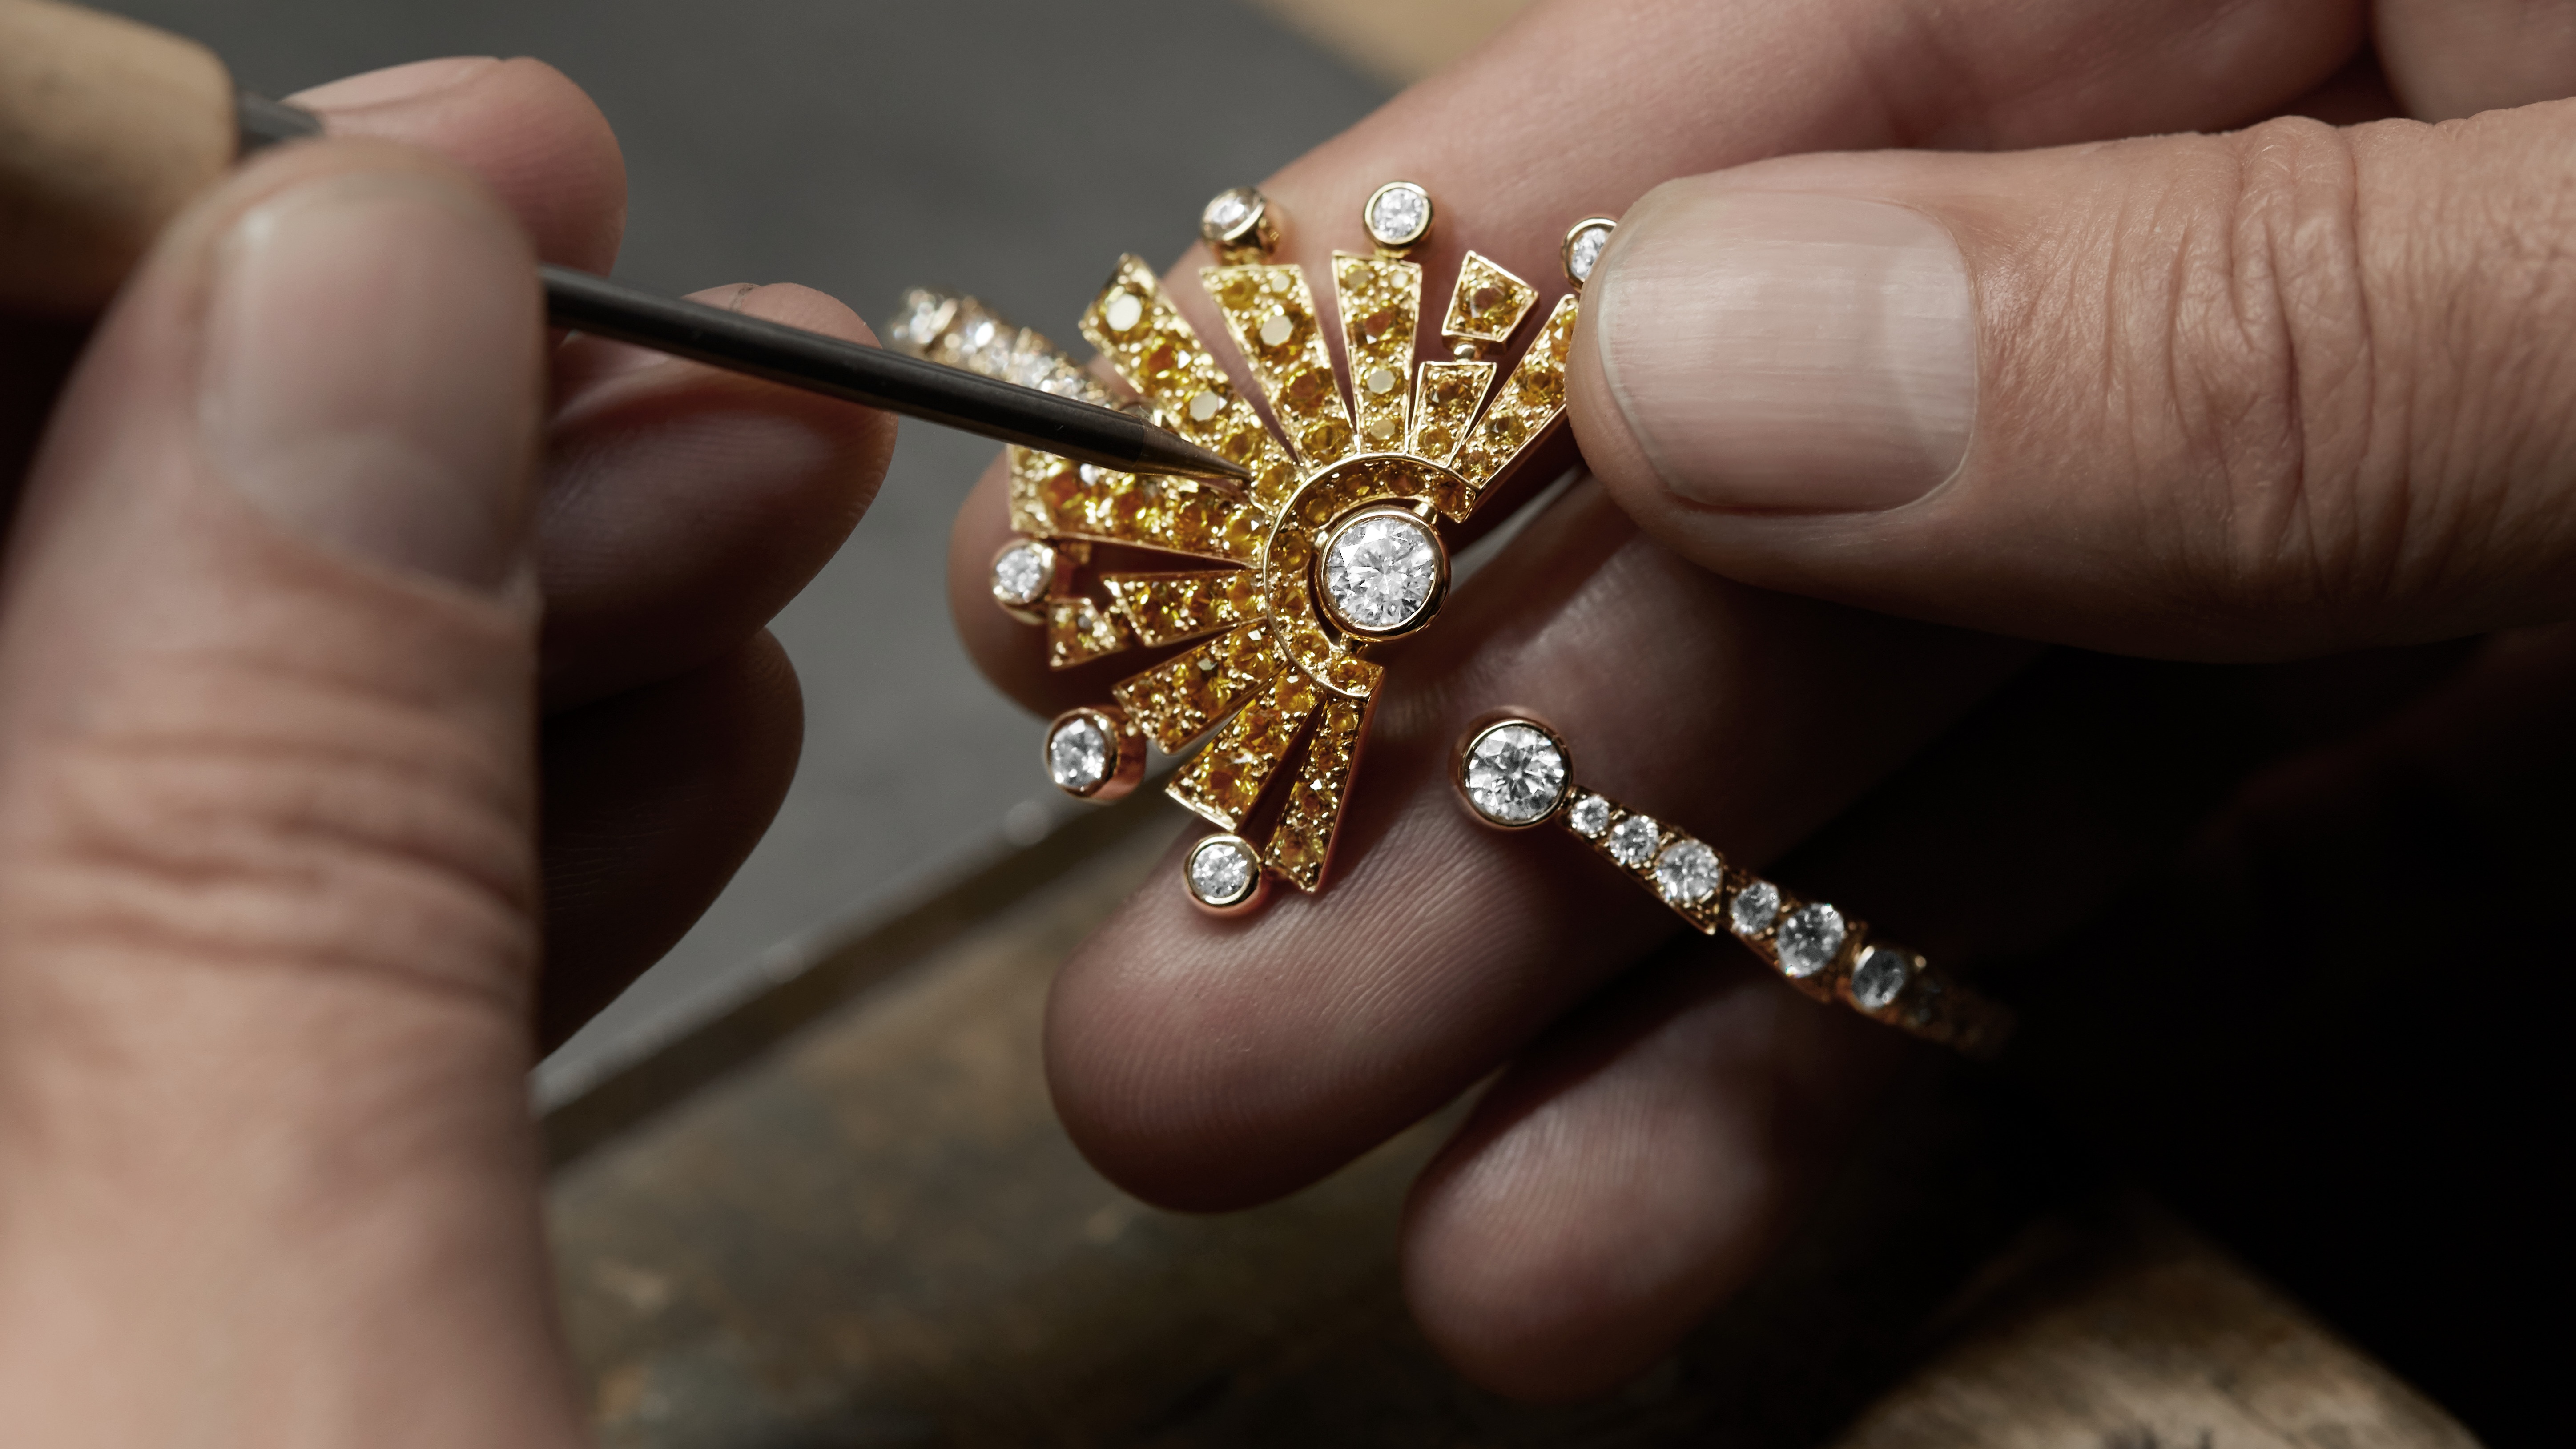 Carved in stone: Chanel's Collection N°5 High Jewellery — Hashtag